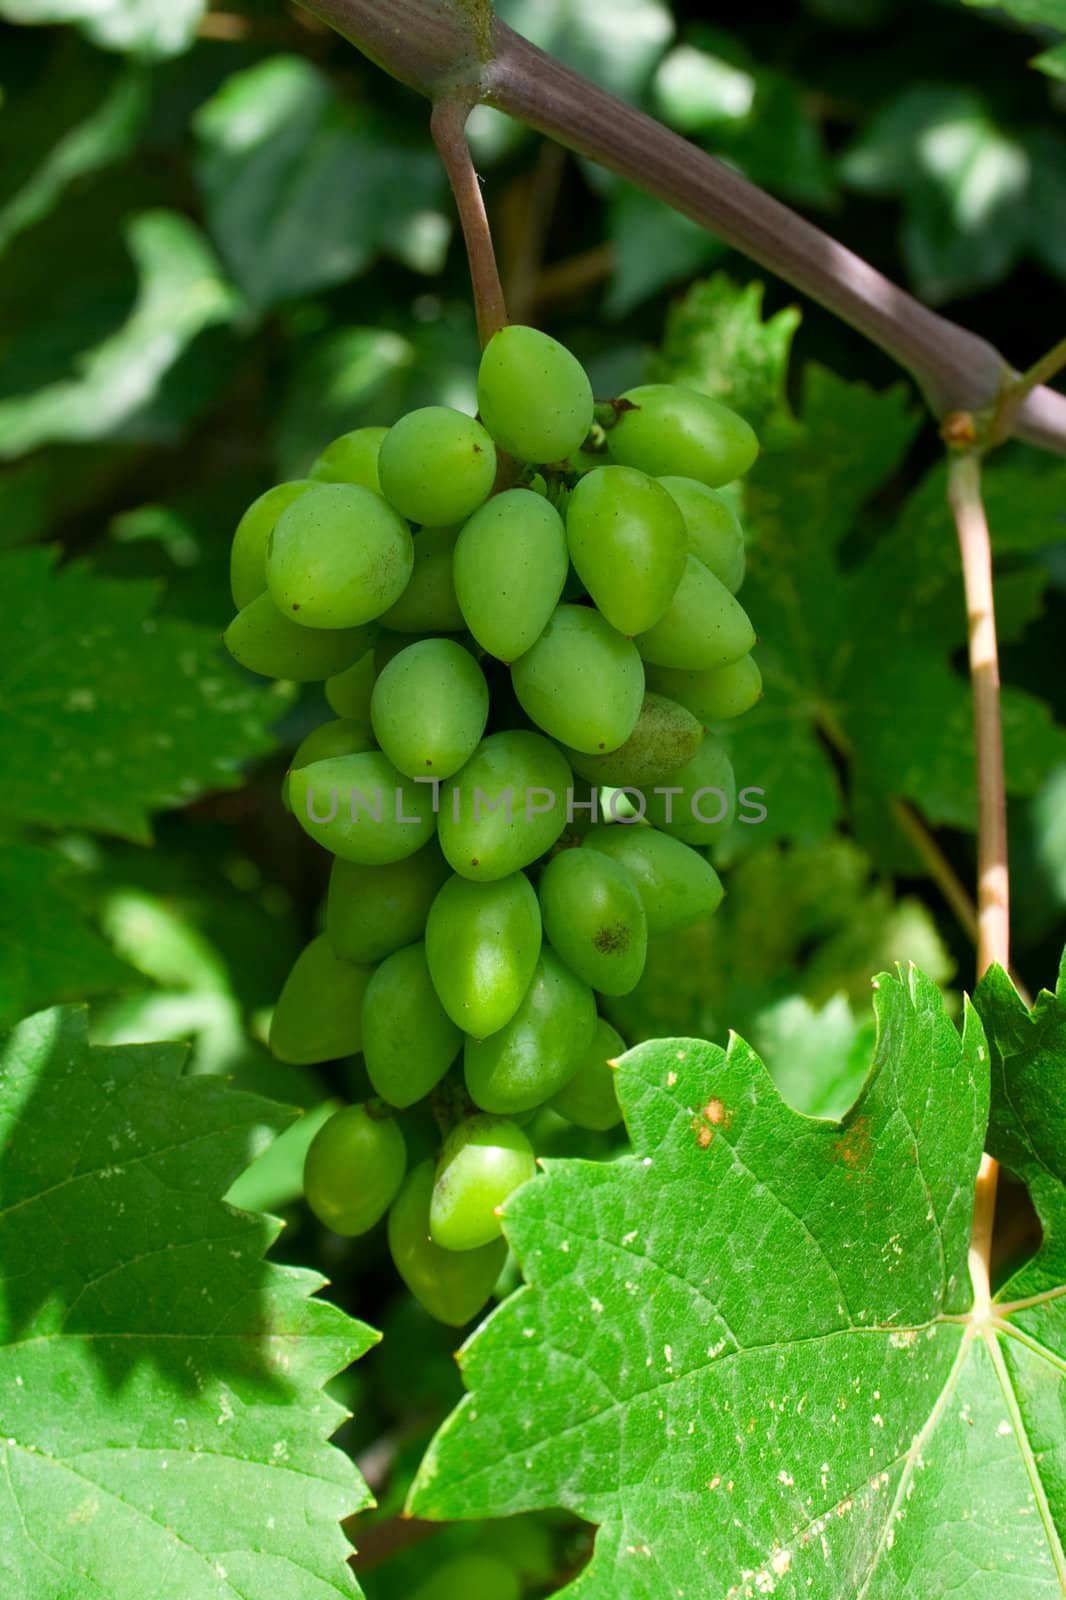 Cluster of unripe grapes on a rod. A close up